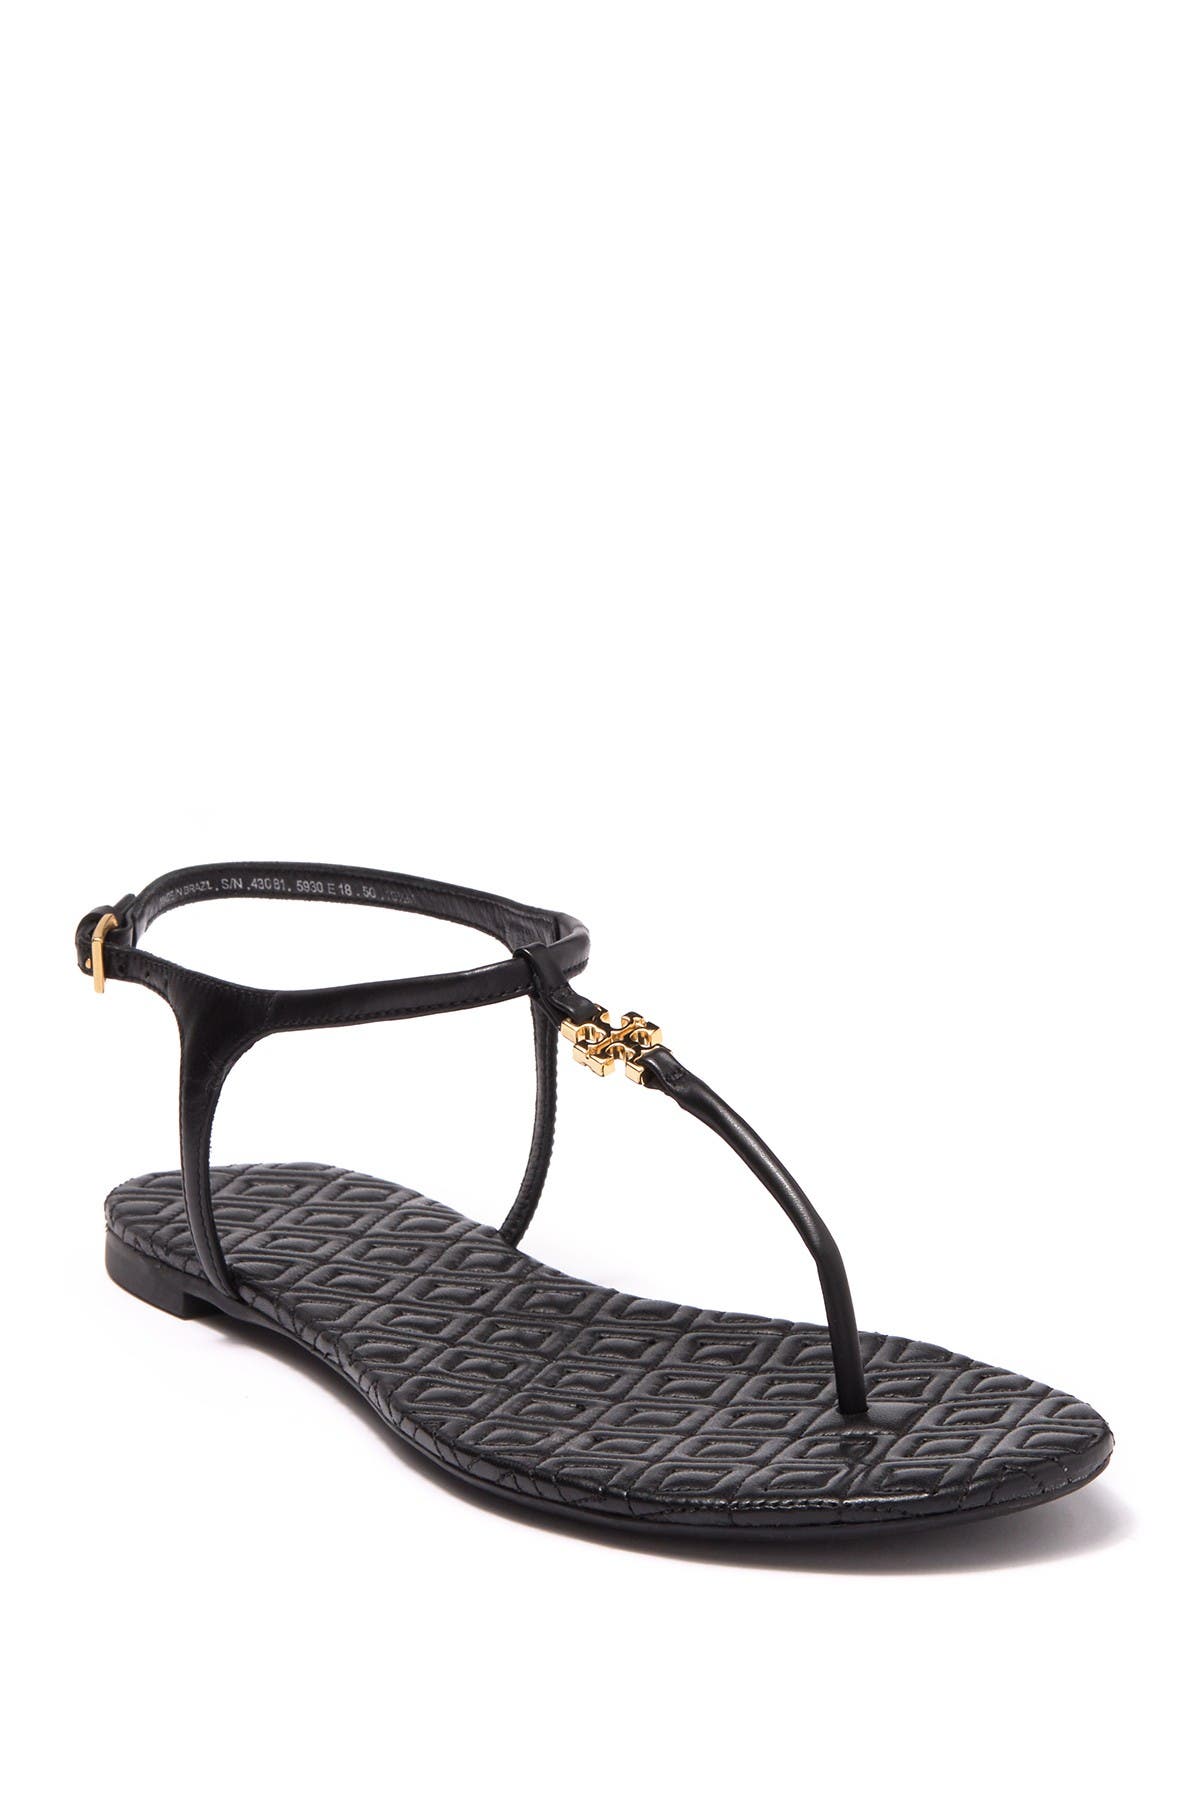 Tory Burch | Marion Quilted Sandal 